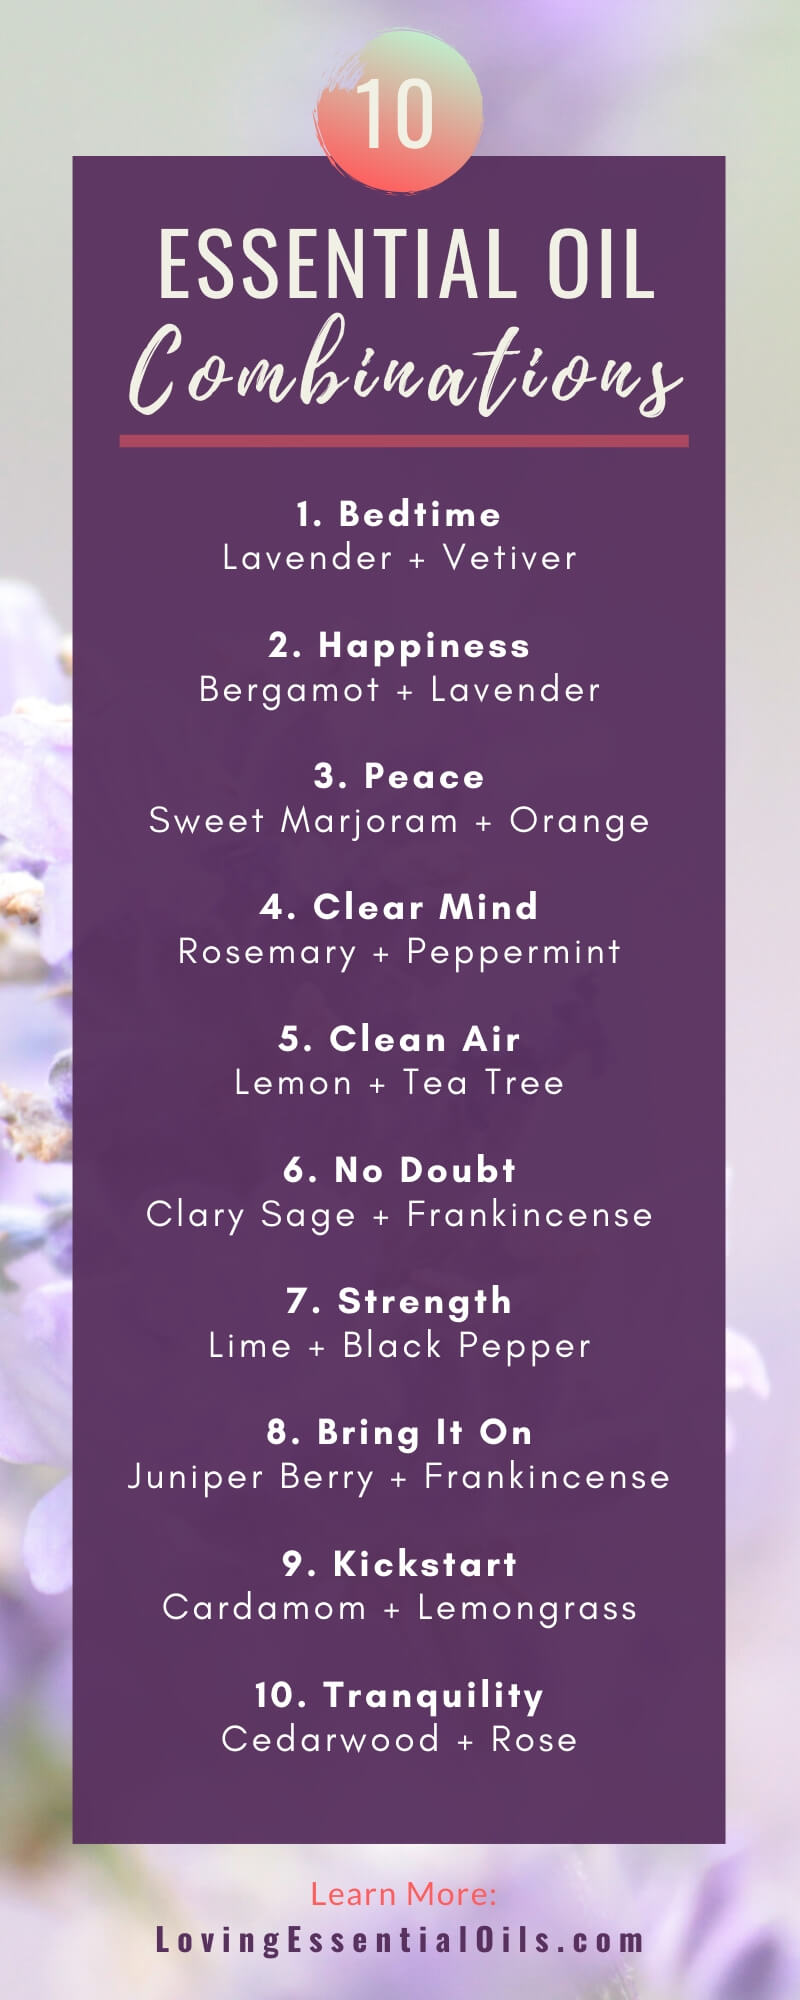 20 Simple Essential Oil Combinations For Diffuser - Aromatherapy Blends ...